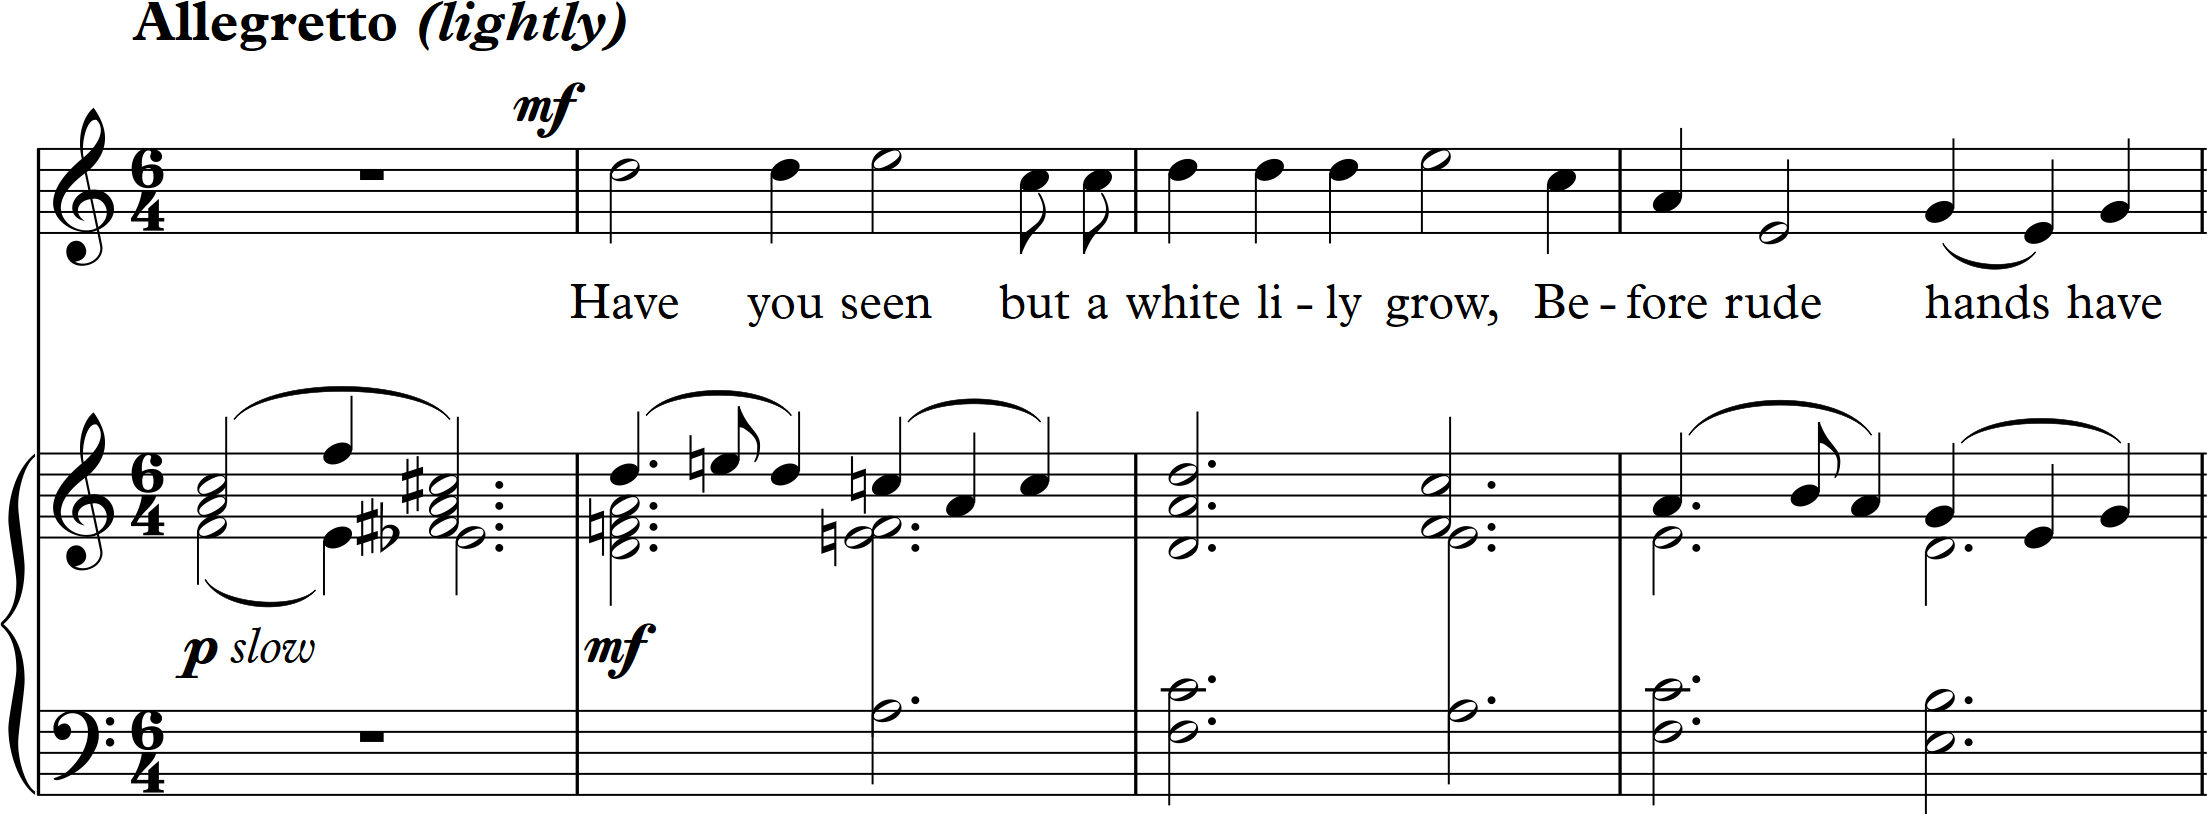 Musical incipit for this work